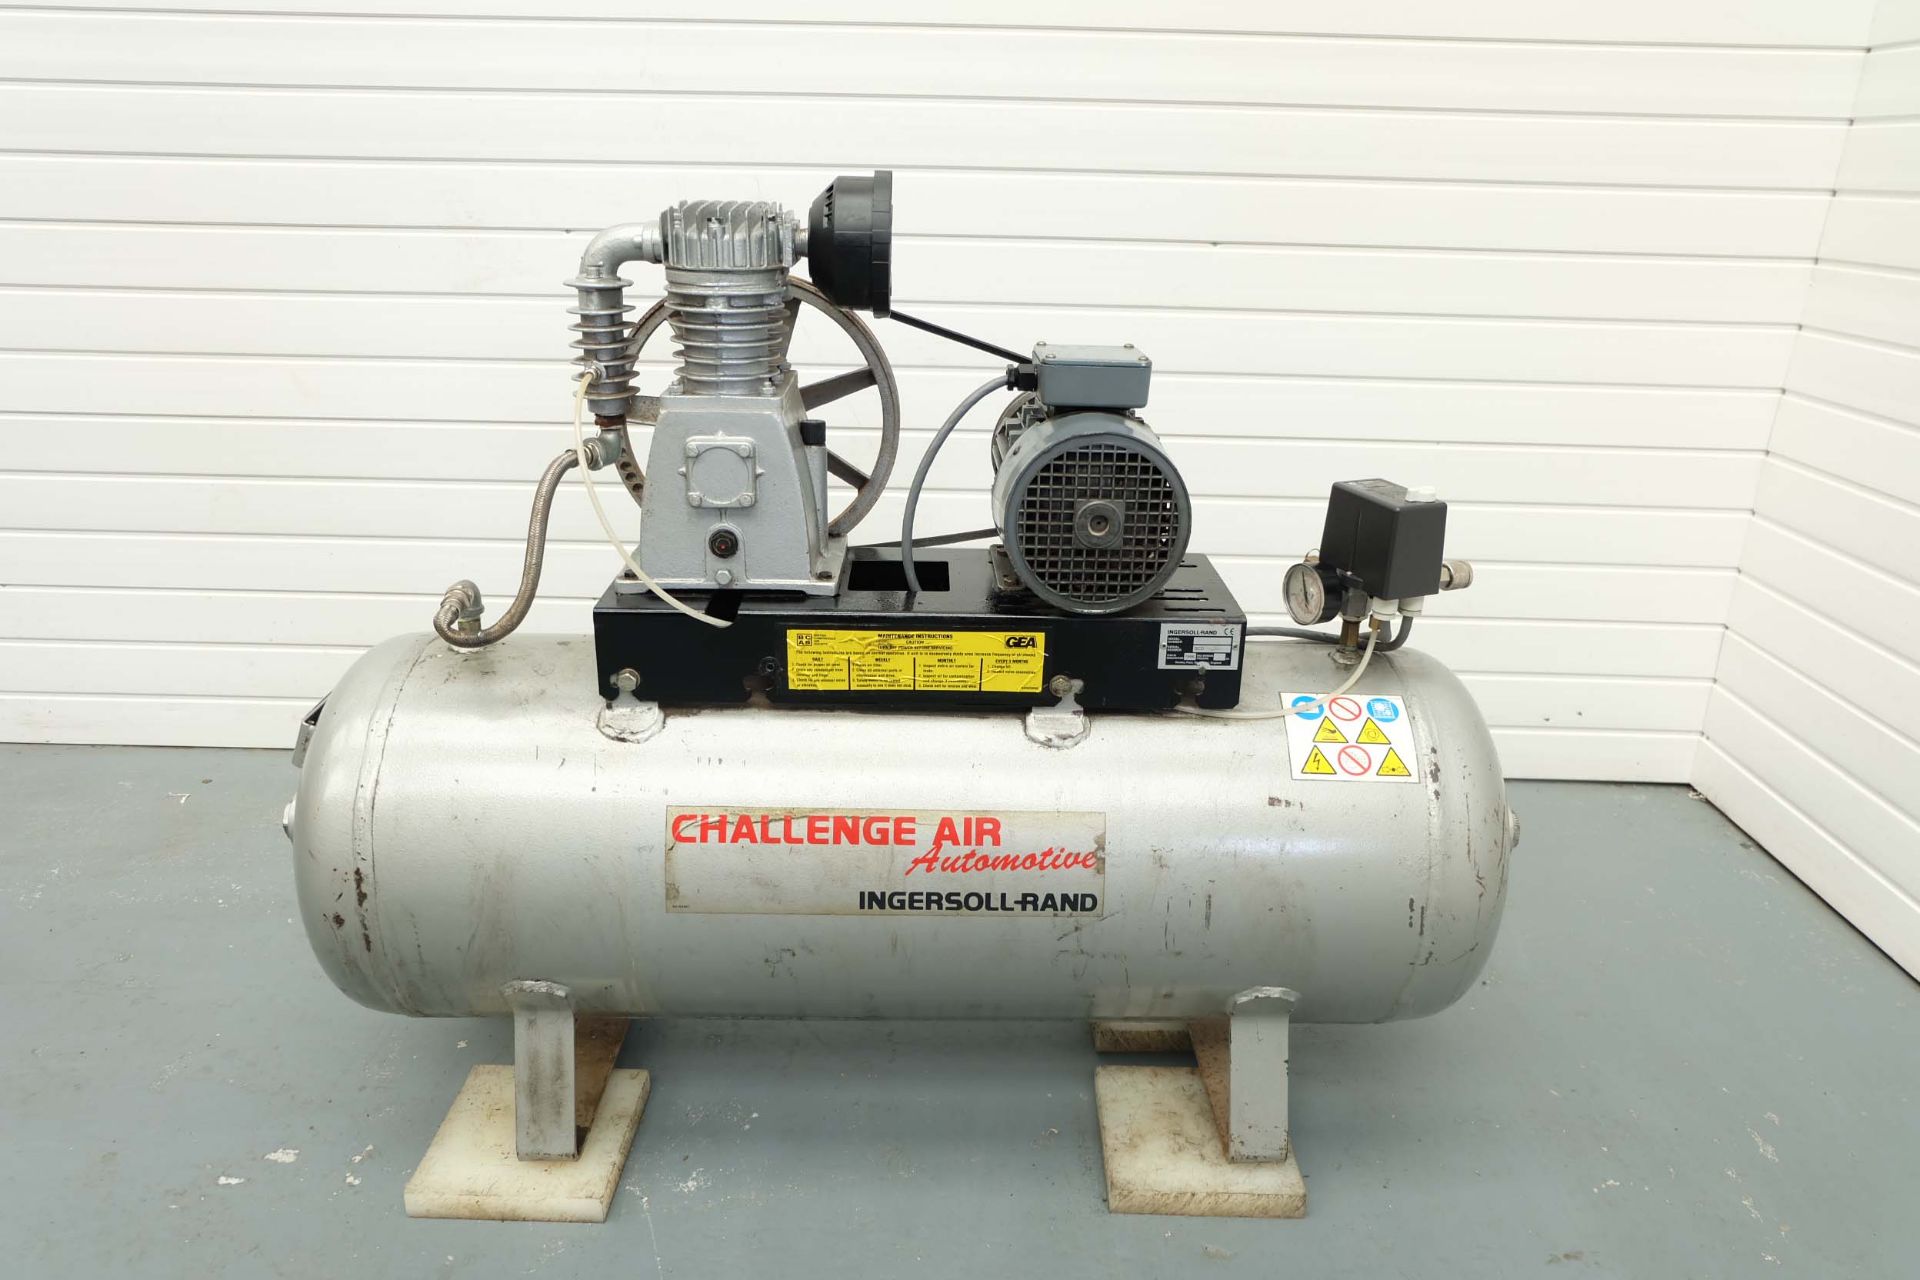 Ingersoll-Rand Model A3 Air Compressor. Power: 2.2 KW. 3 Phase. Max Pressure: 10 Bar.